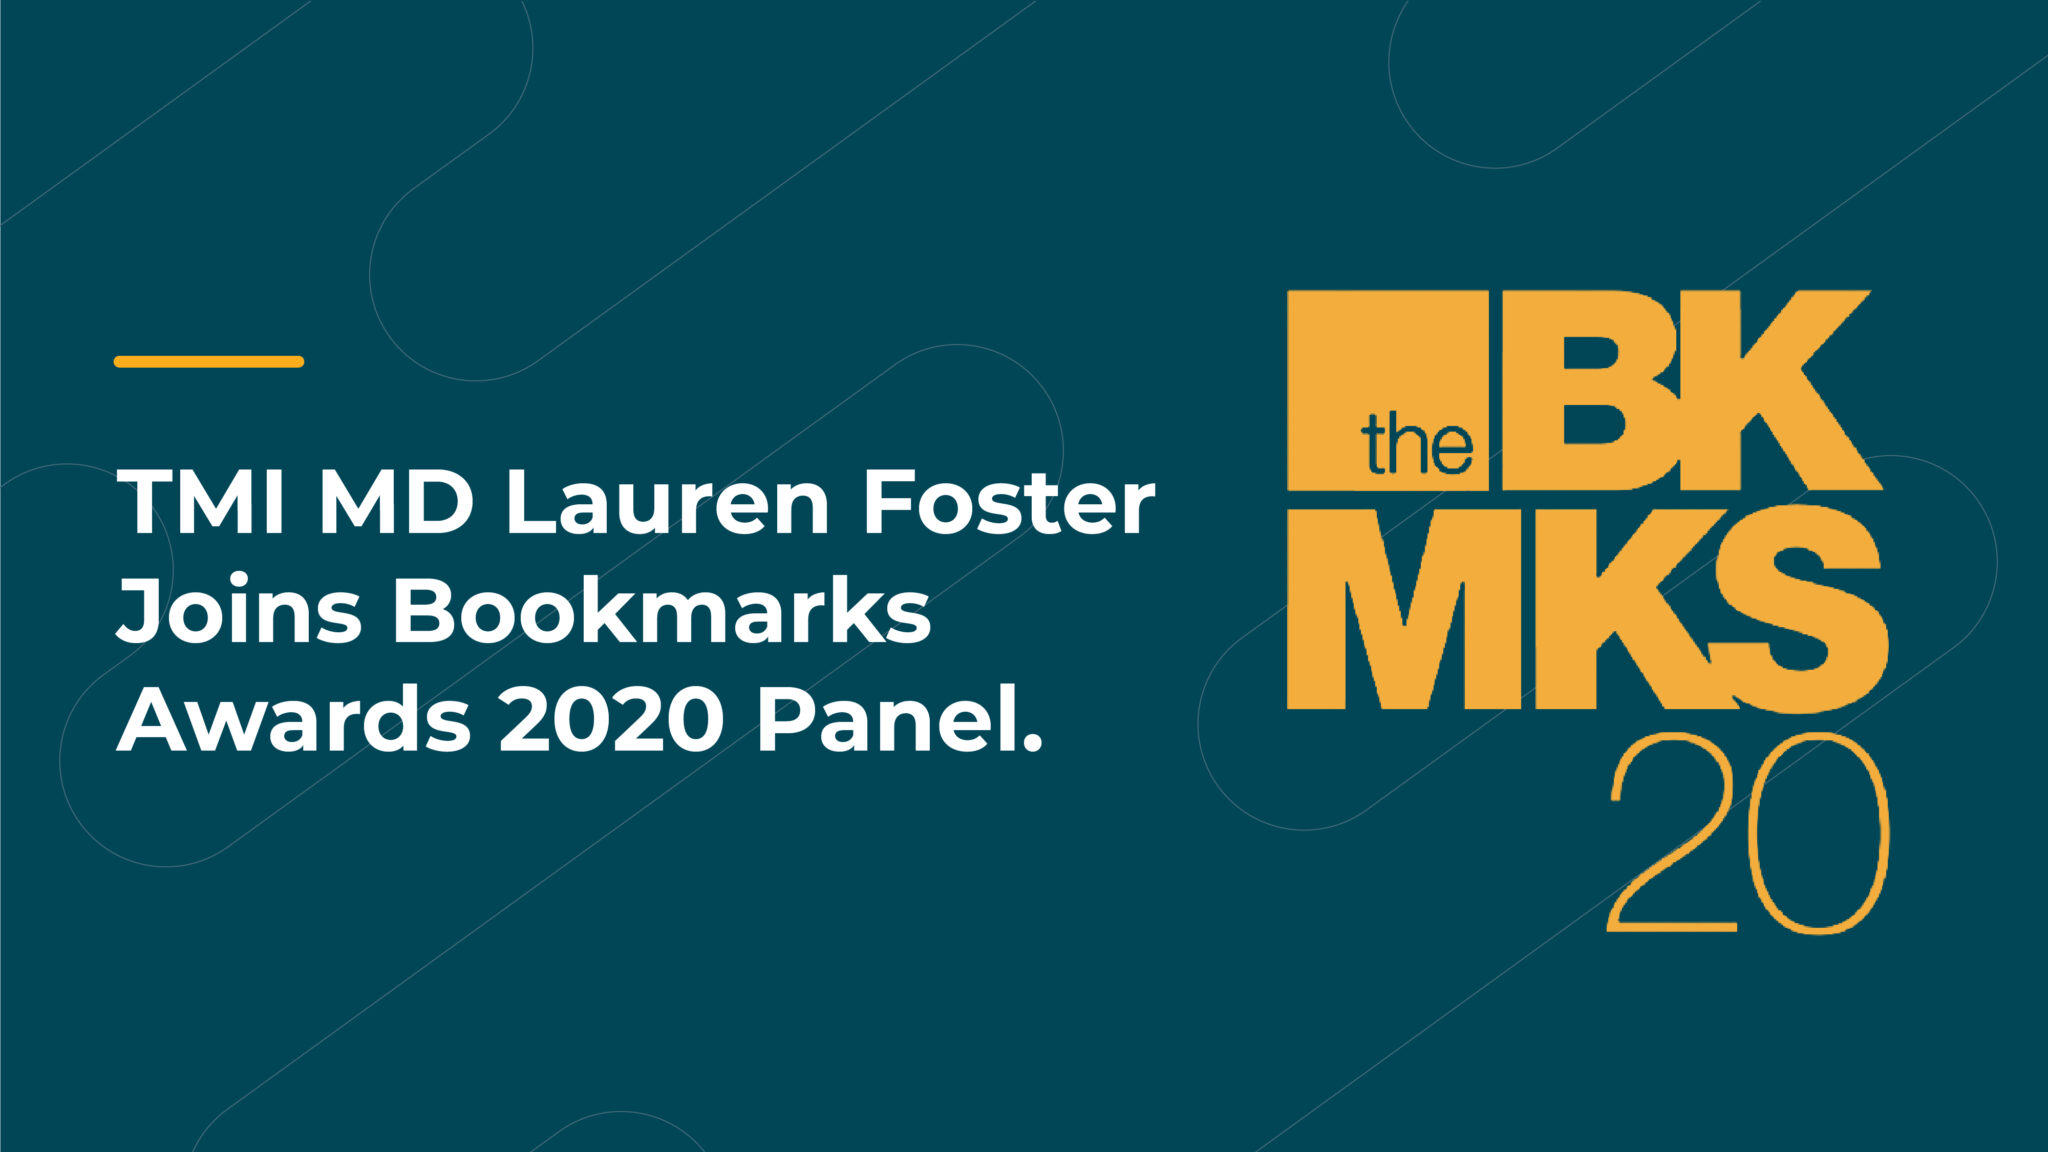 TMI MD Lauren Foster Joins Bookmarks Awards 2020 Panel